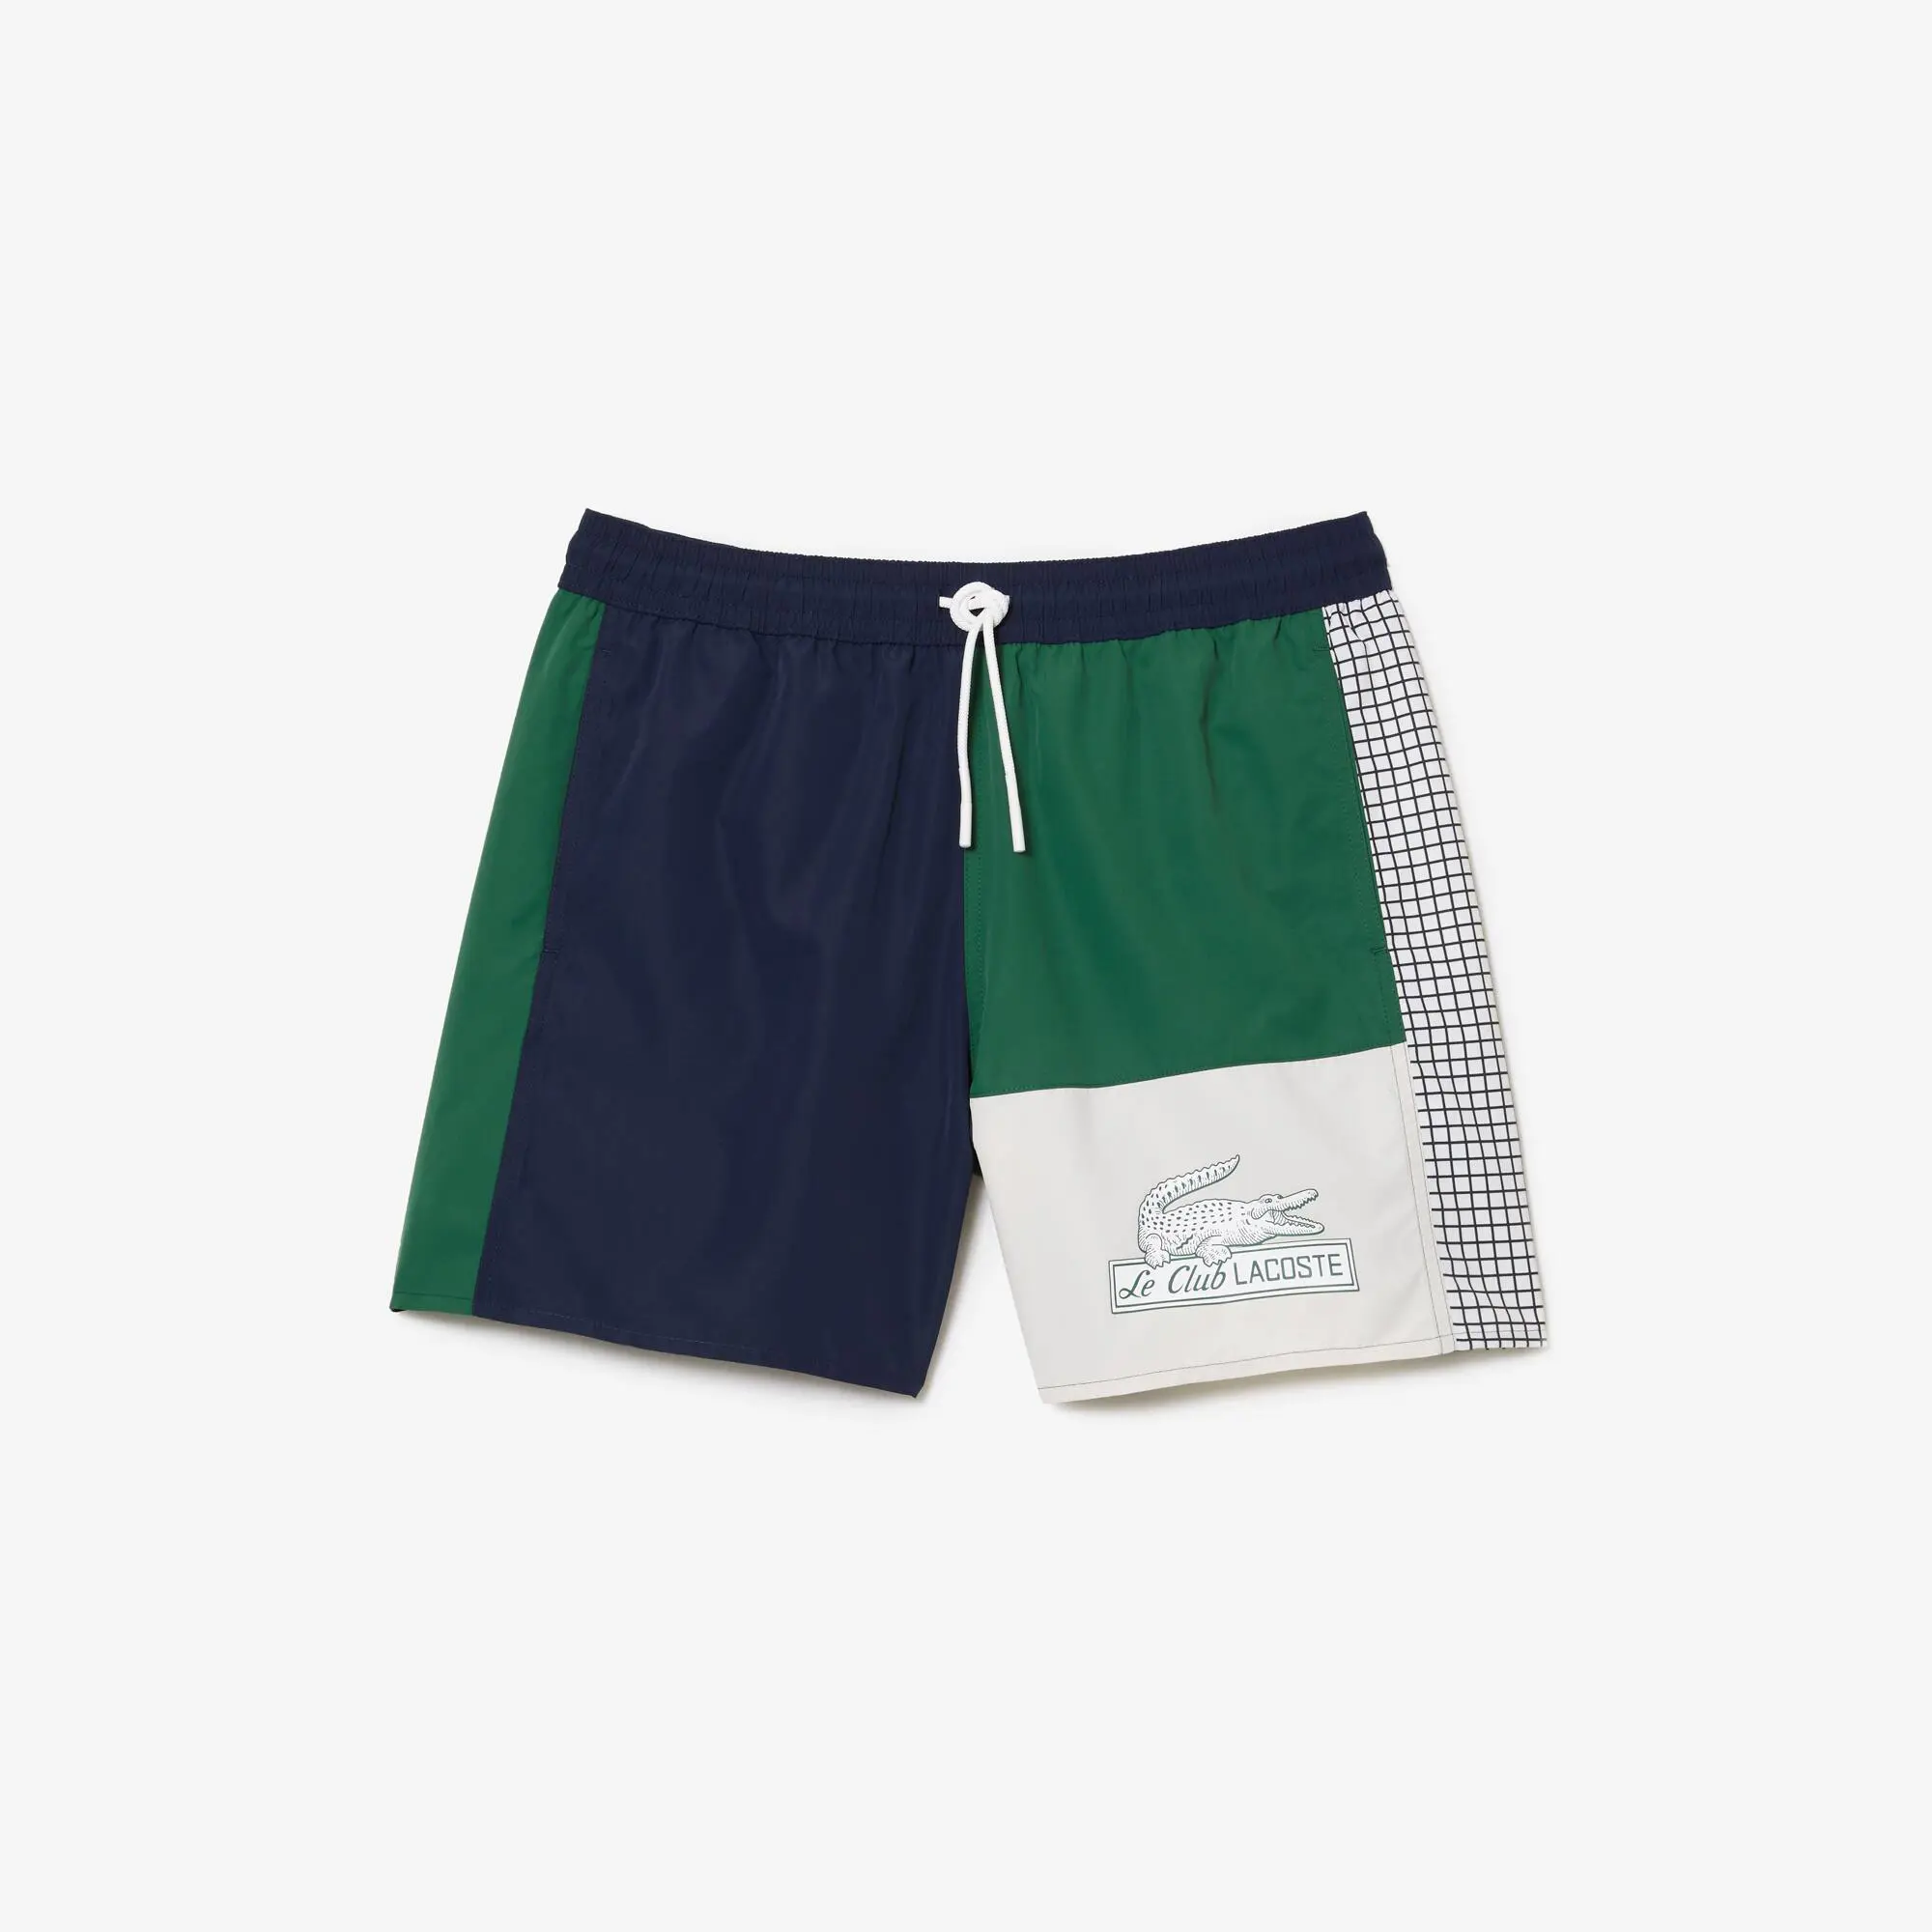 Lacoste Men’s Lacoste Recycled Polyester Colourblock Swim Trunks. 2